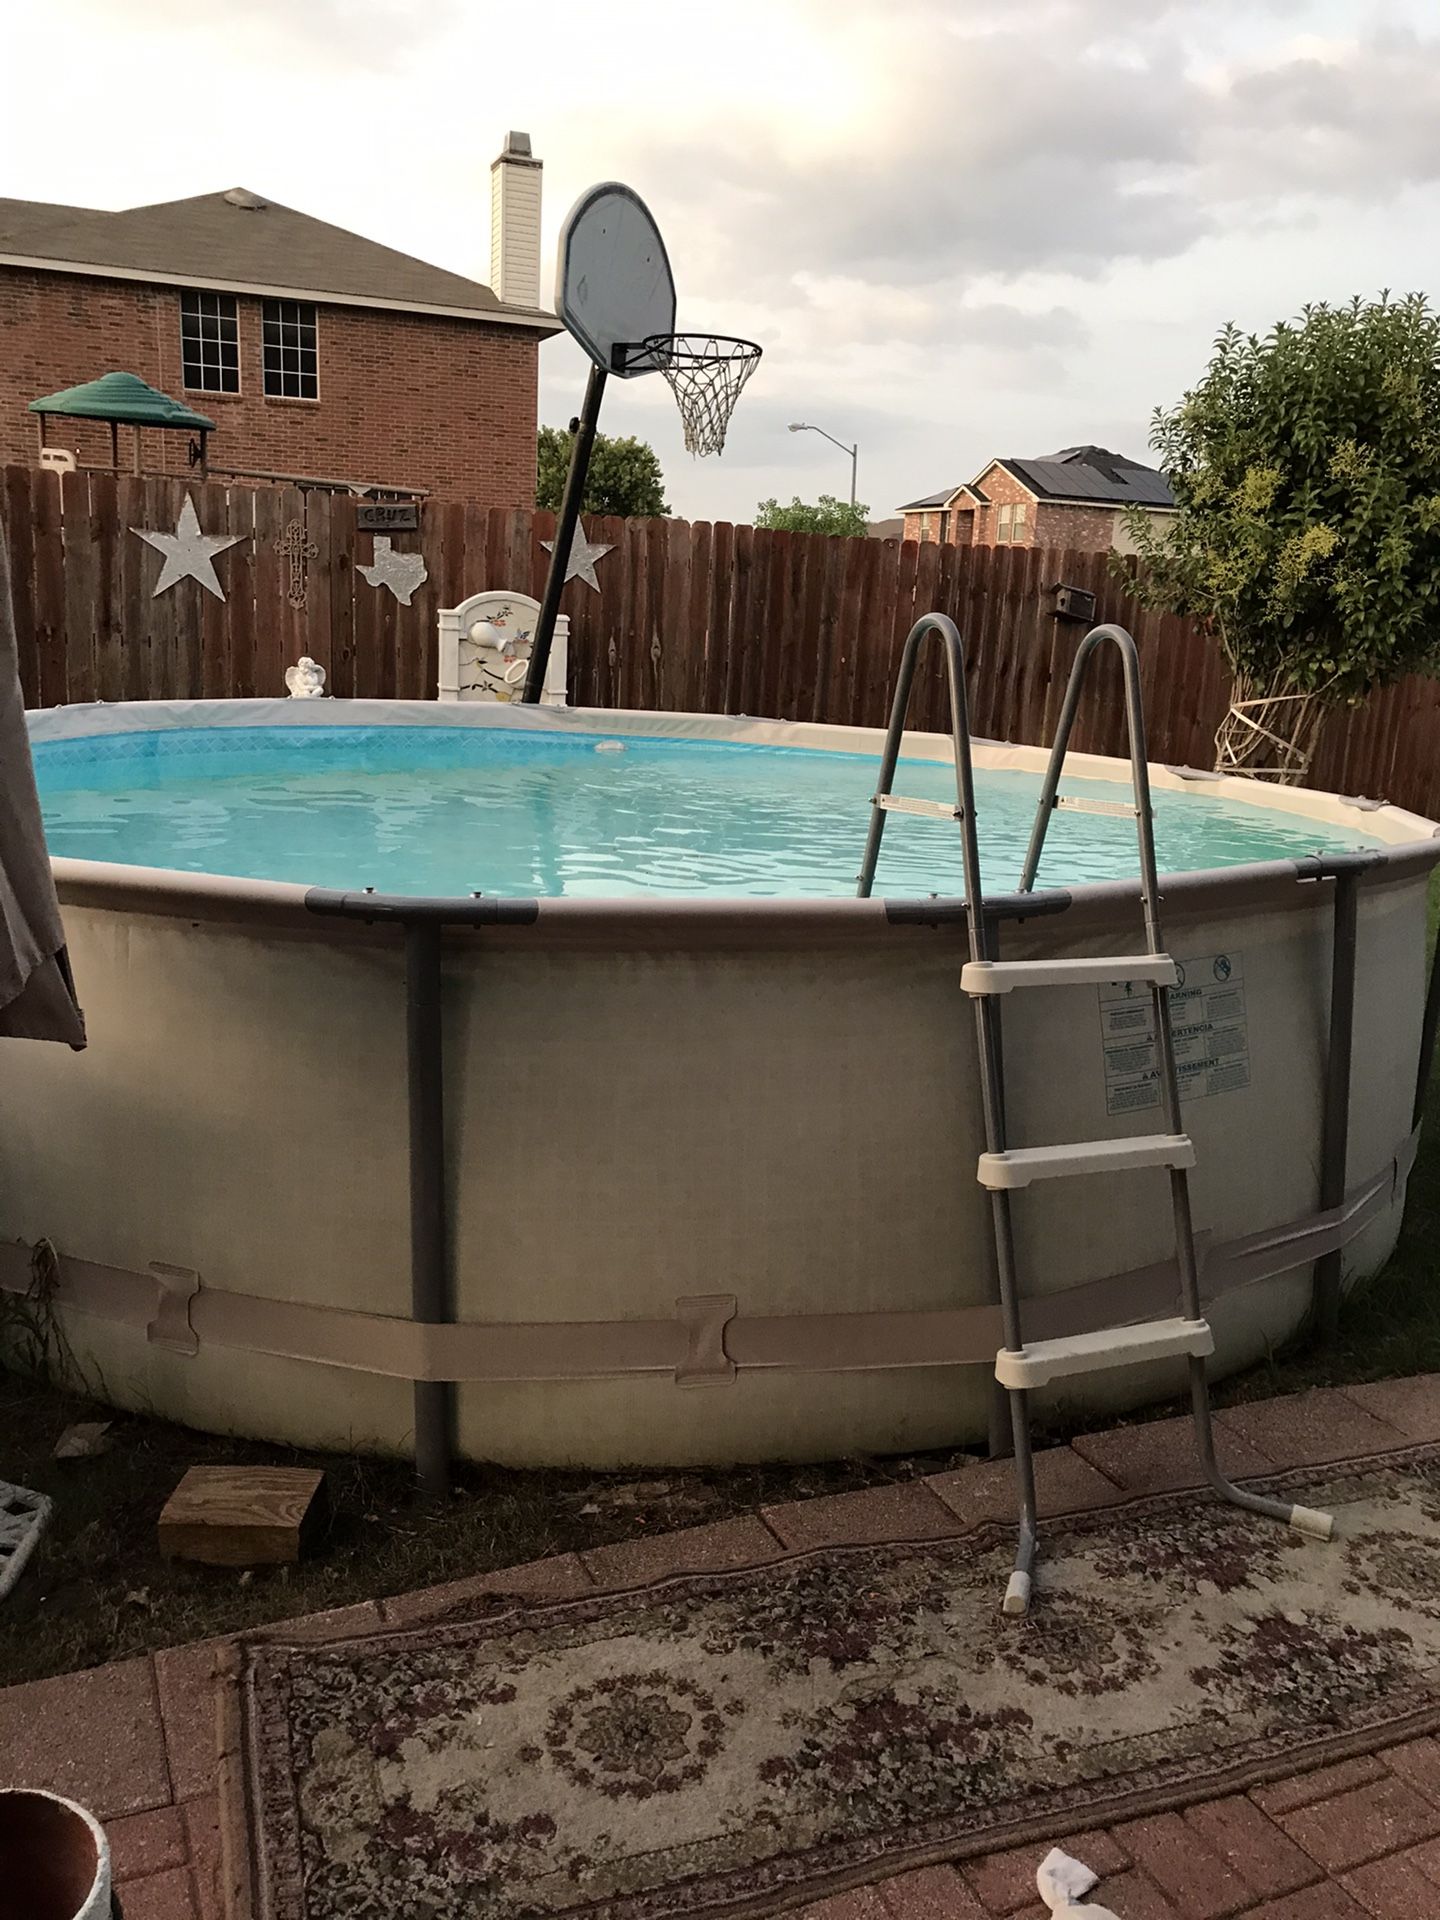 Swimming pool for sale used only for 3 months. / alberca en venta usada solo por 3 meses